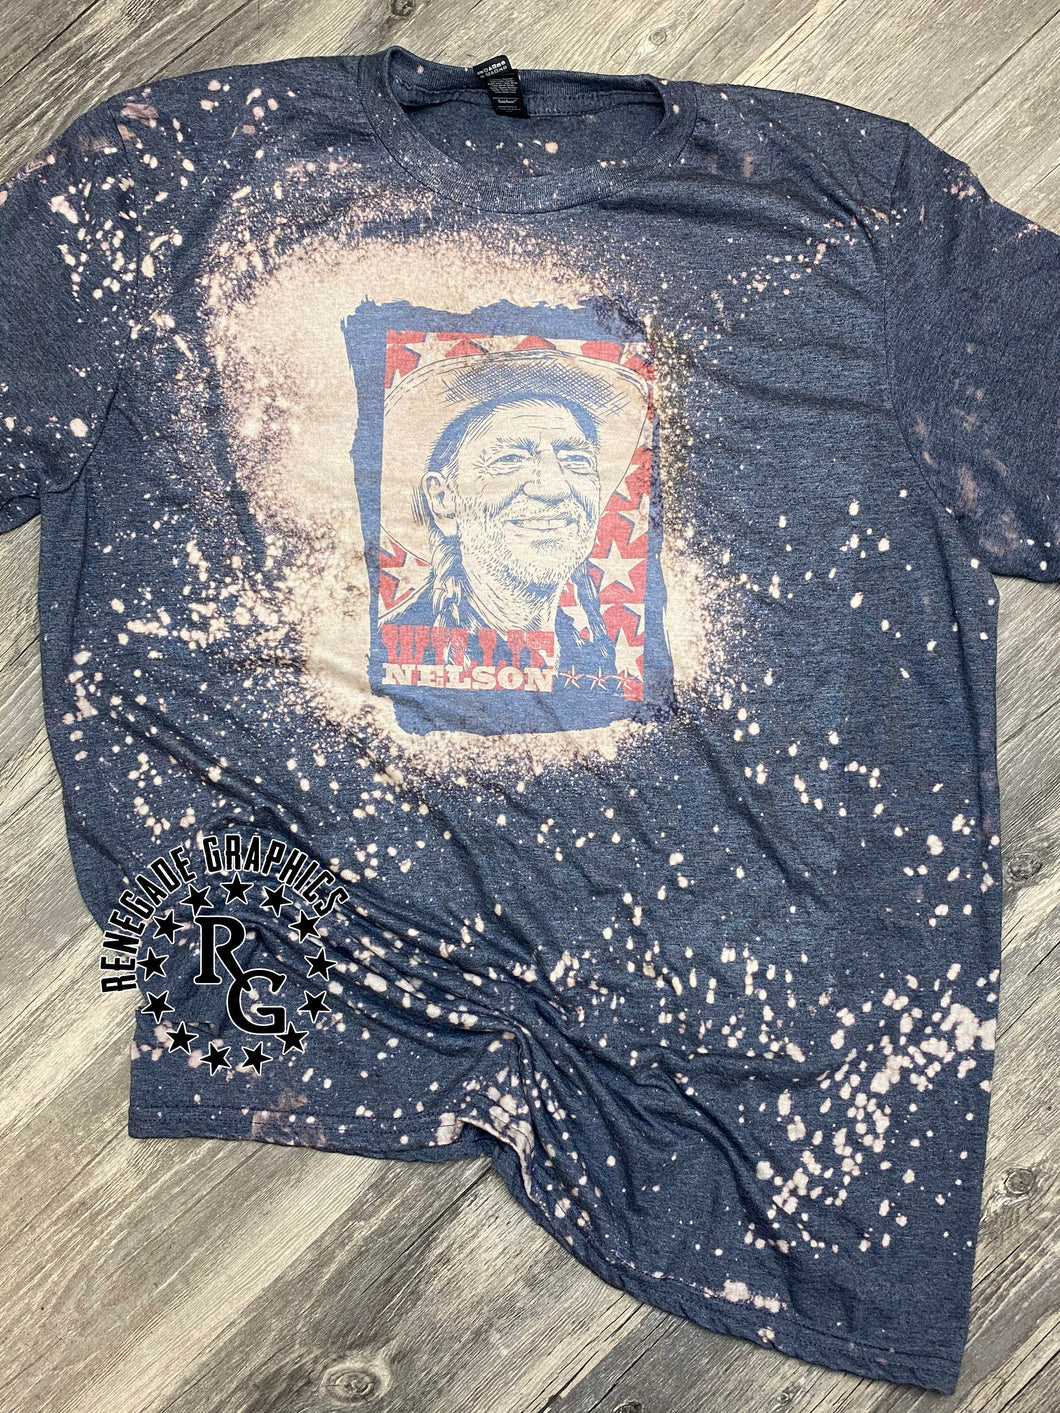 Willie Nelson | Country Music | Singer | Sketch | Outlaw | Vintage | Bleached Shirt